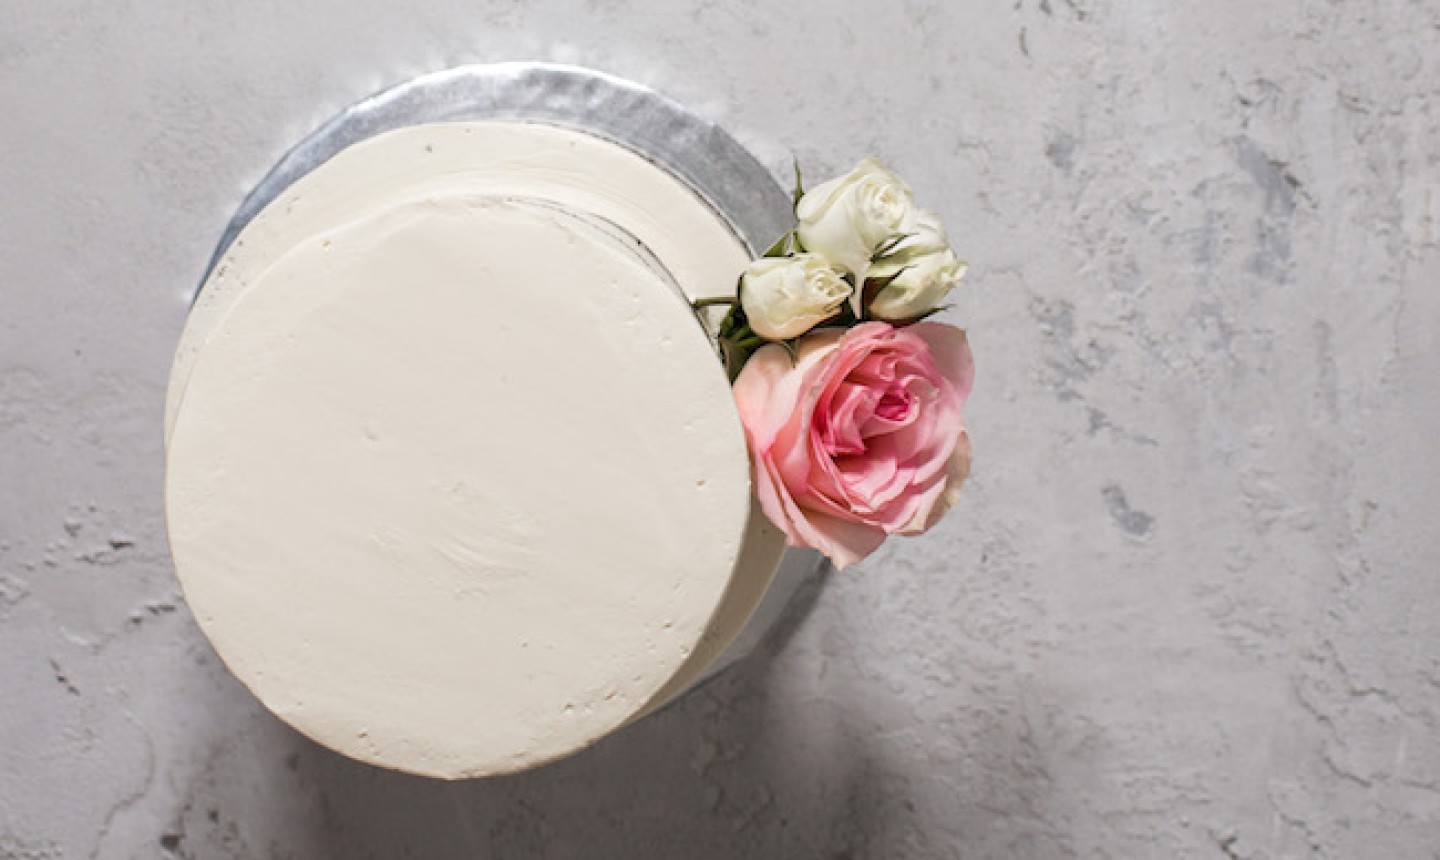 How to decorate a wedding cake